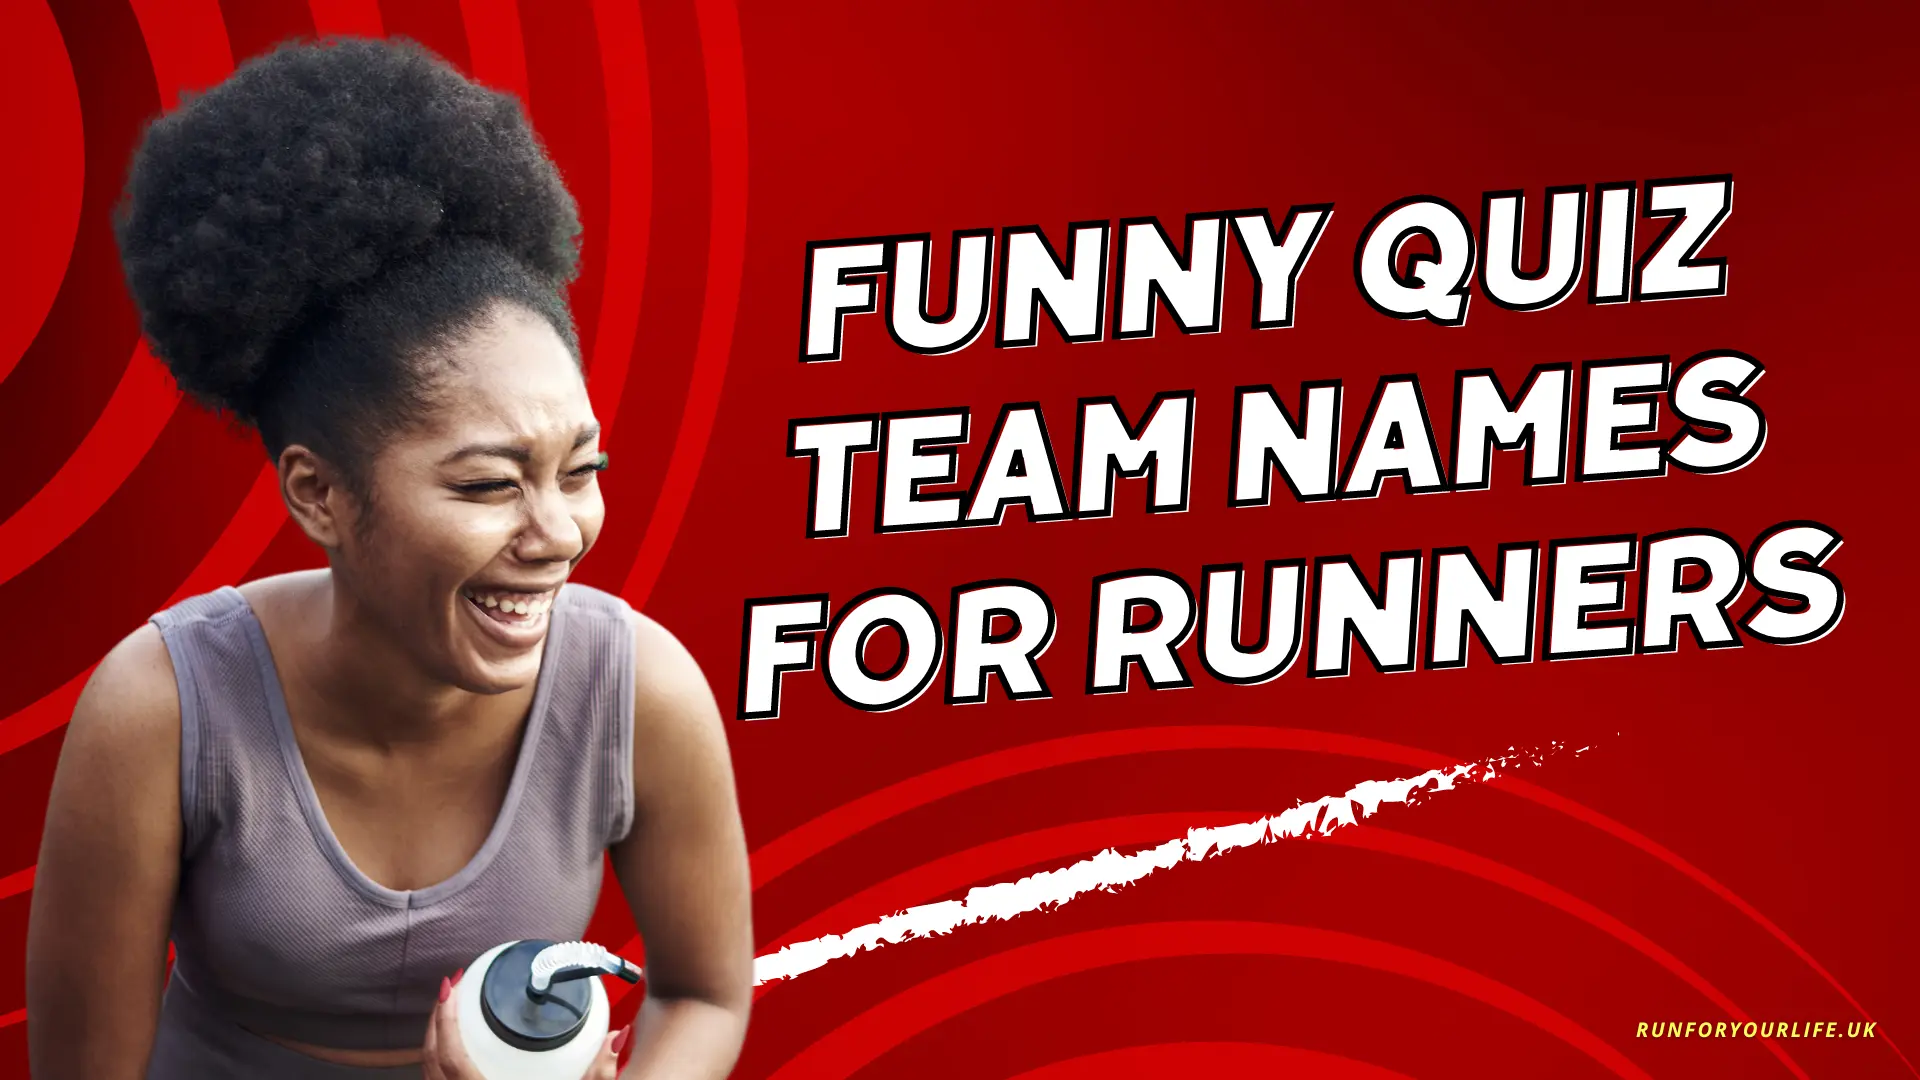 Funny quiz team names for runners